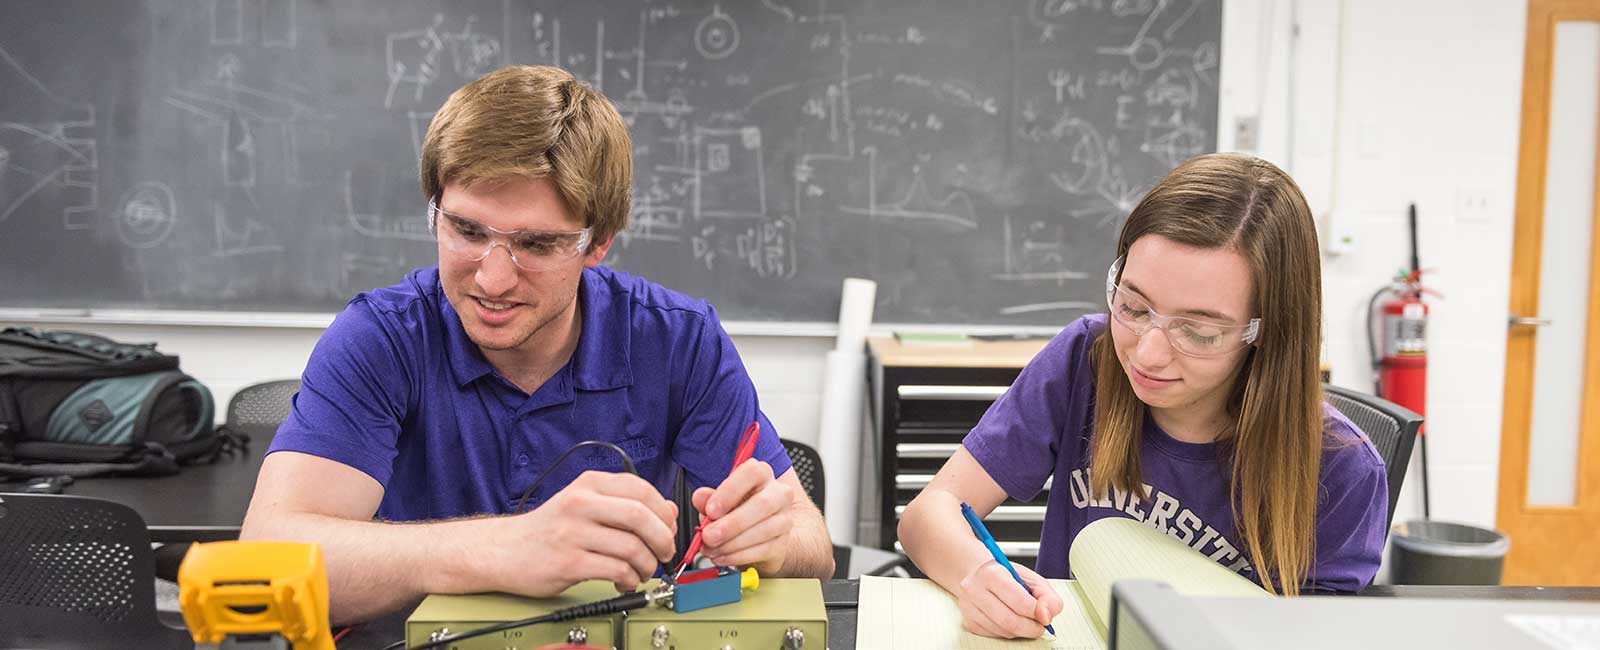 Two students working on a project in a lab